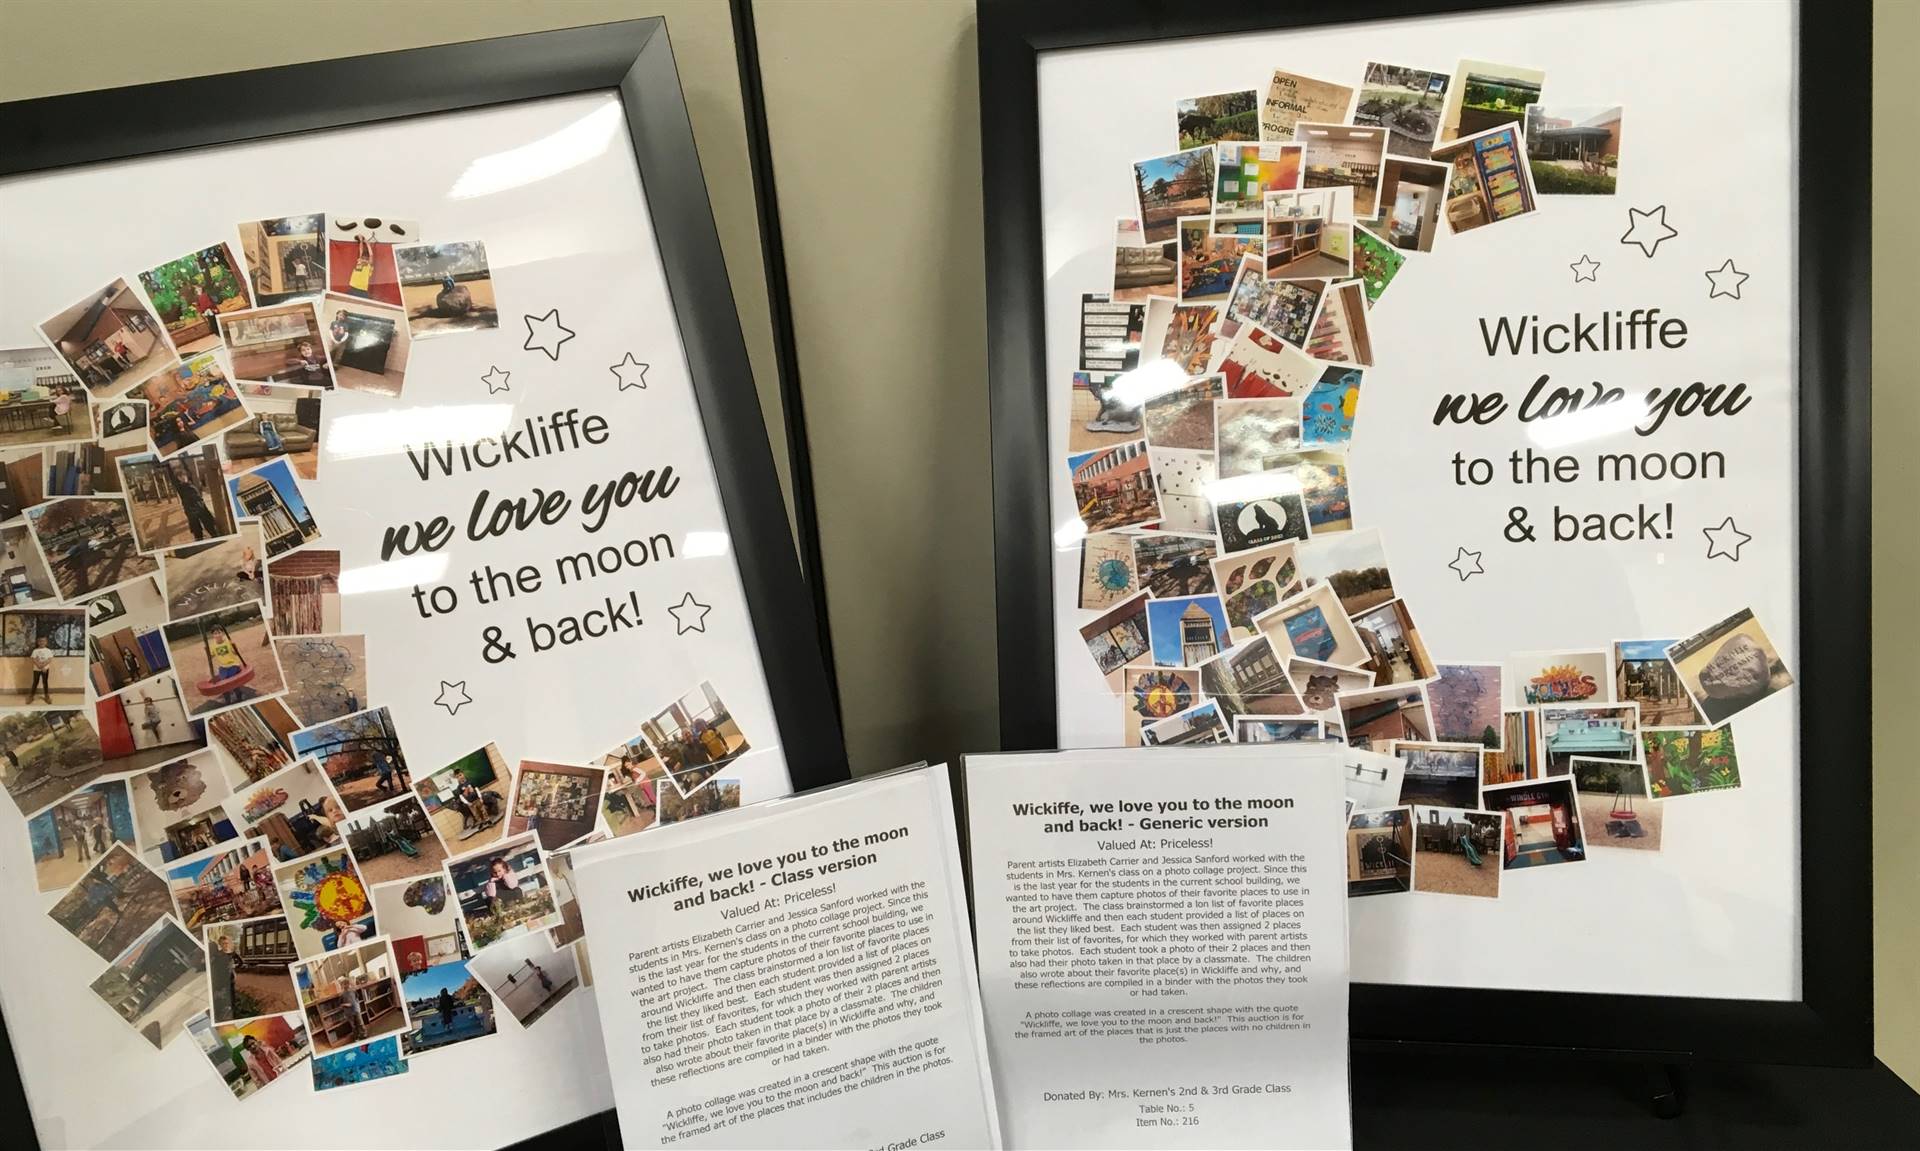 Informal Affair Art Project: We Love You to the Moon